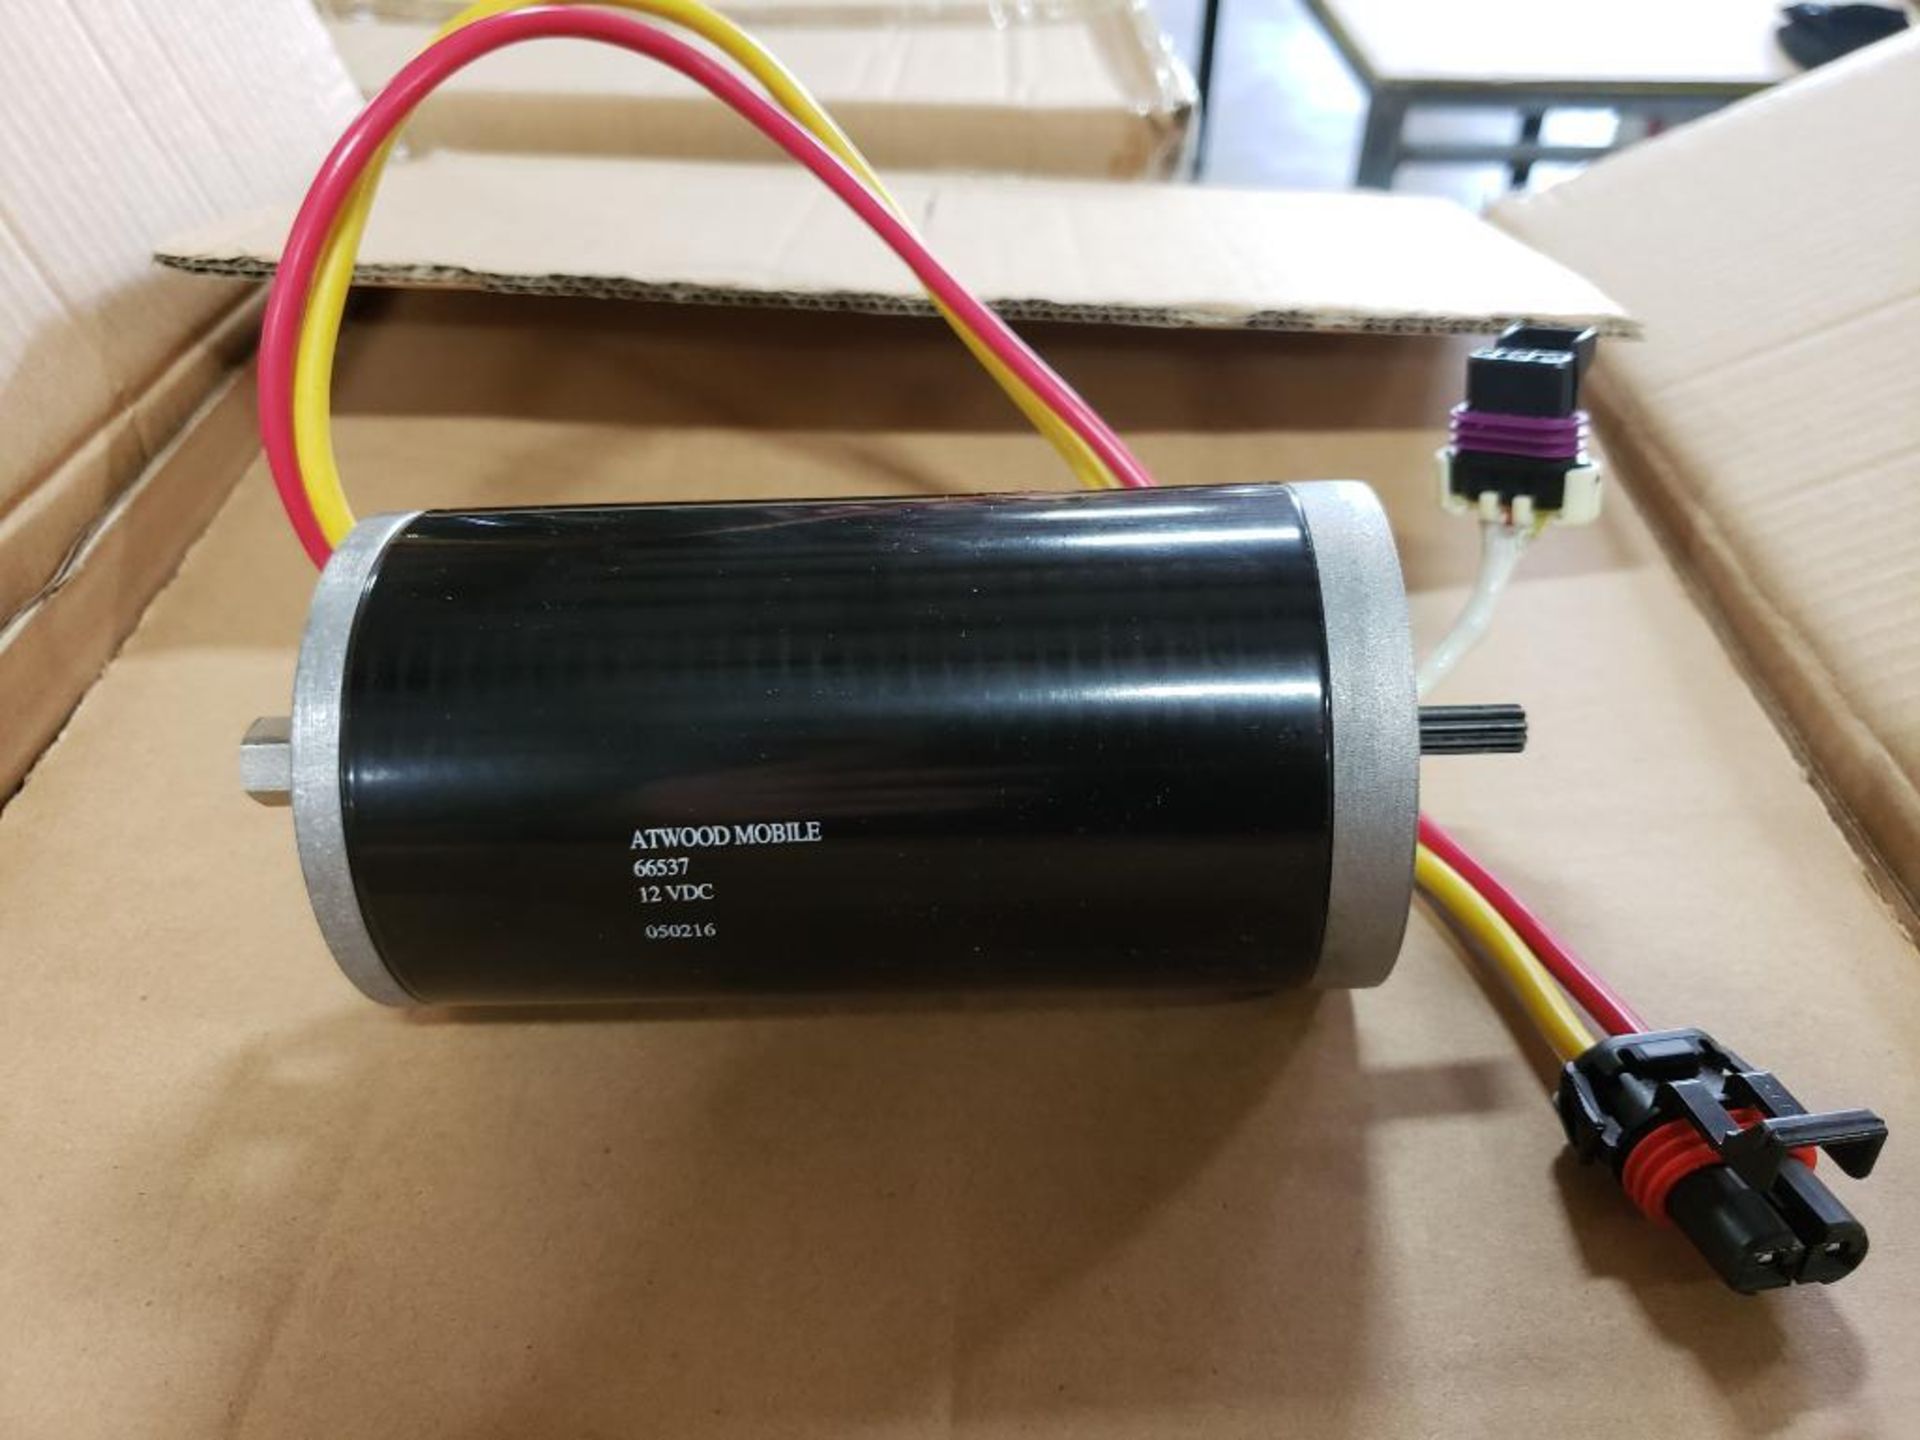 Qty 18 - Chiaphua components PM30R-60F-1004. Atwood Mobile 66537 12VDC Motors. New in box. - Image 3 of 4